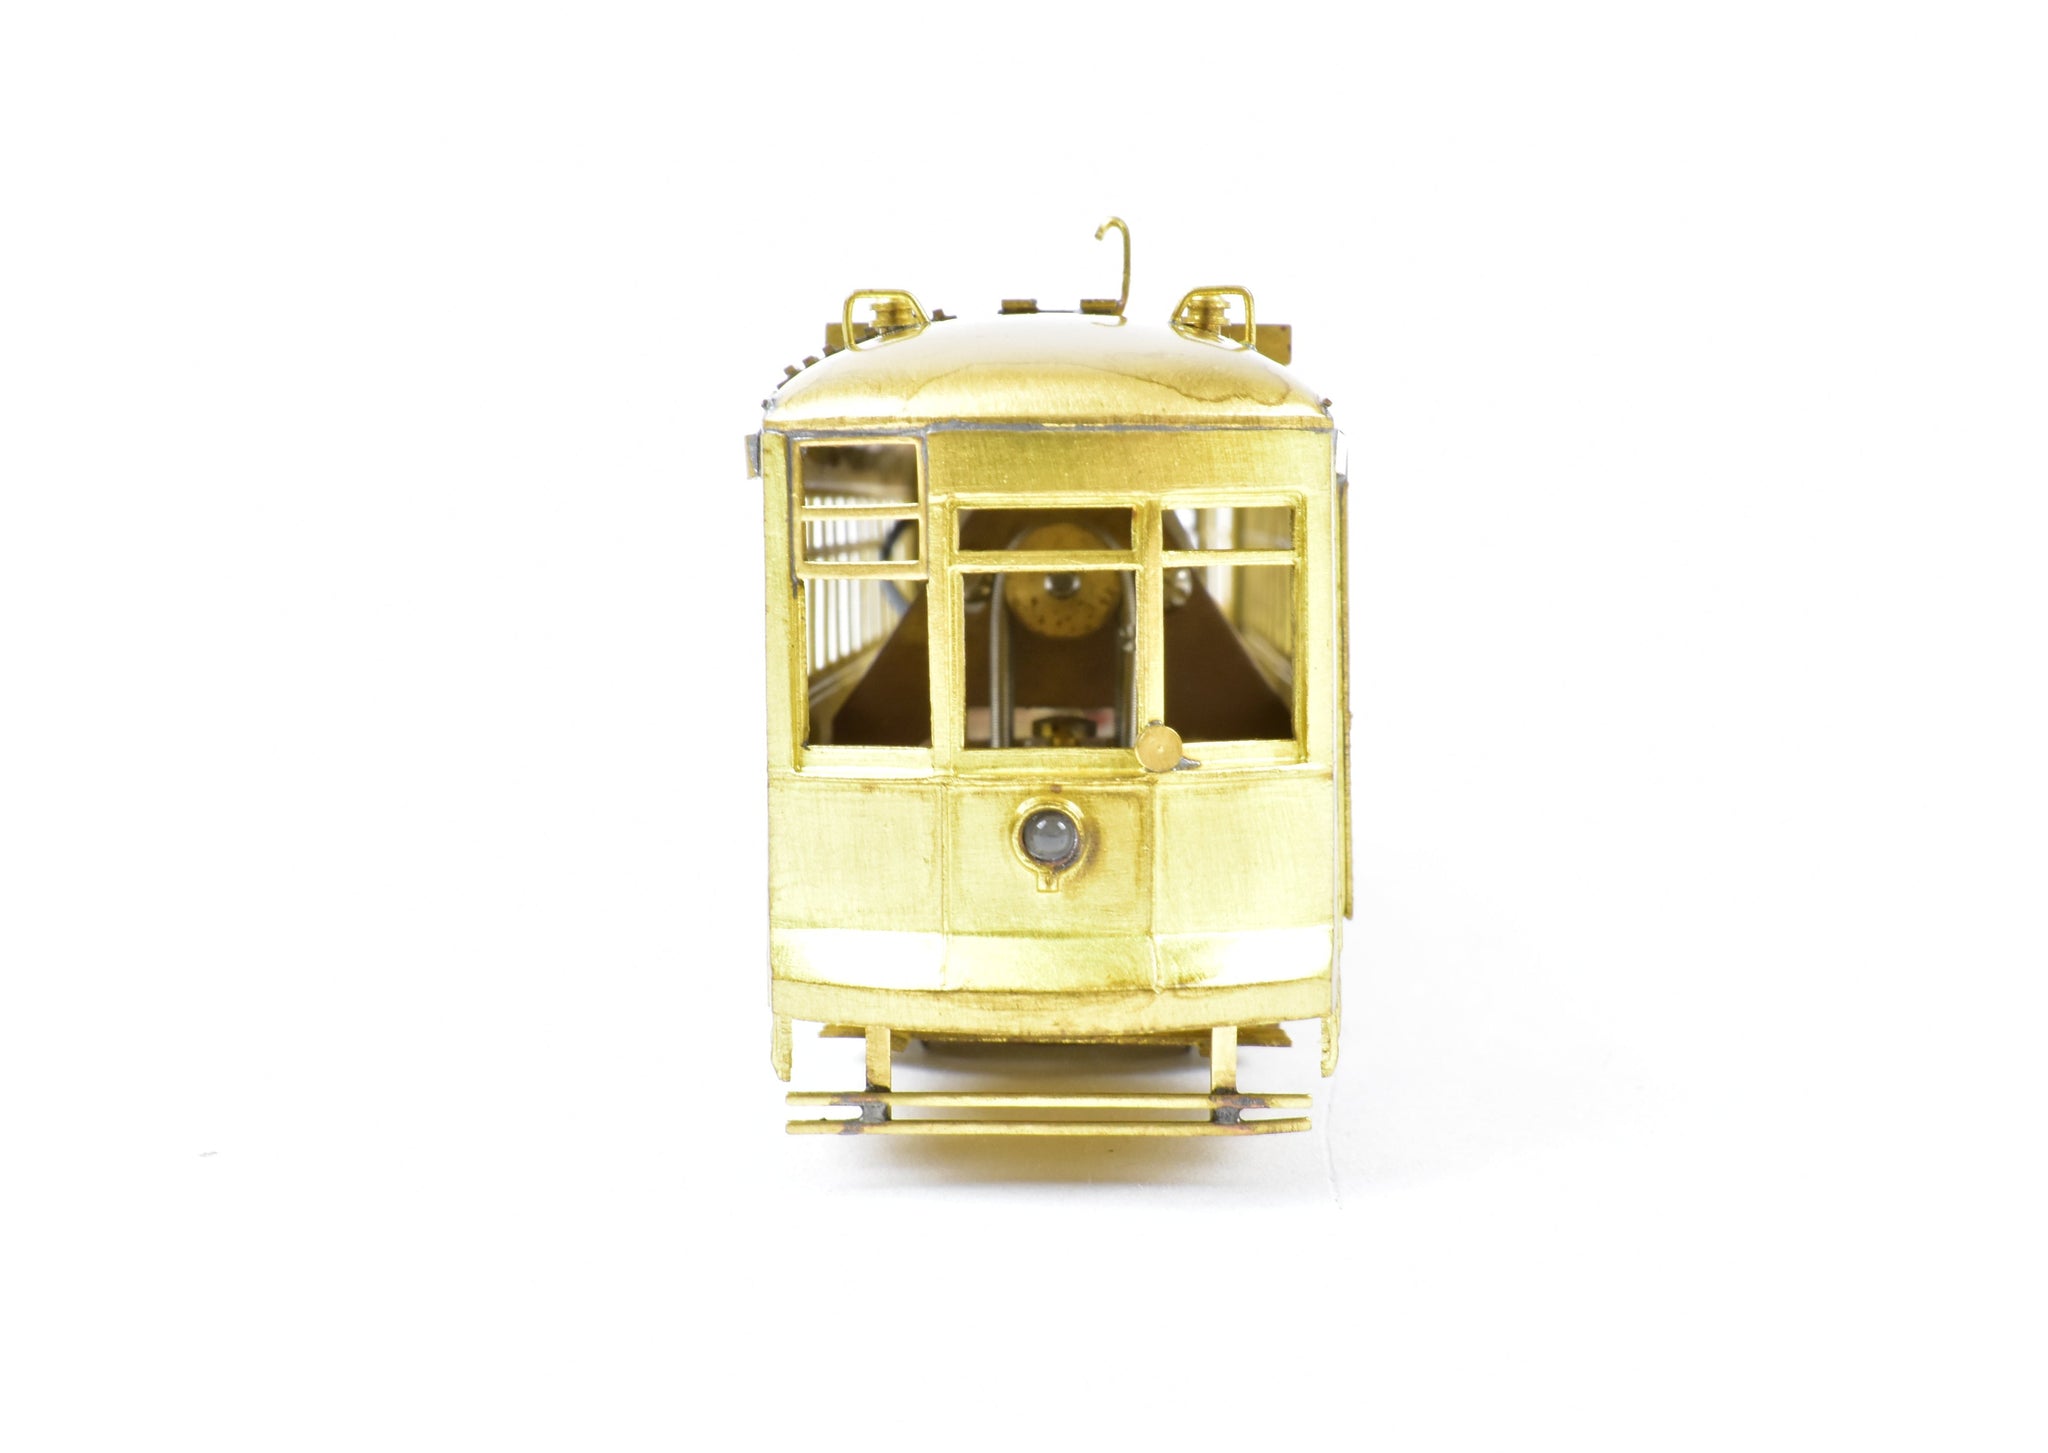 HO Brass Fairfield Models 345-2 CSL - Chicago Surface Lines Two 